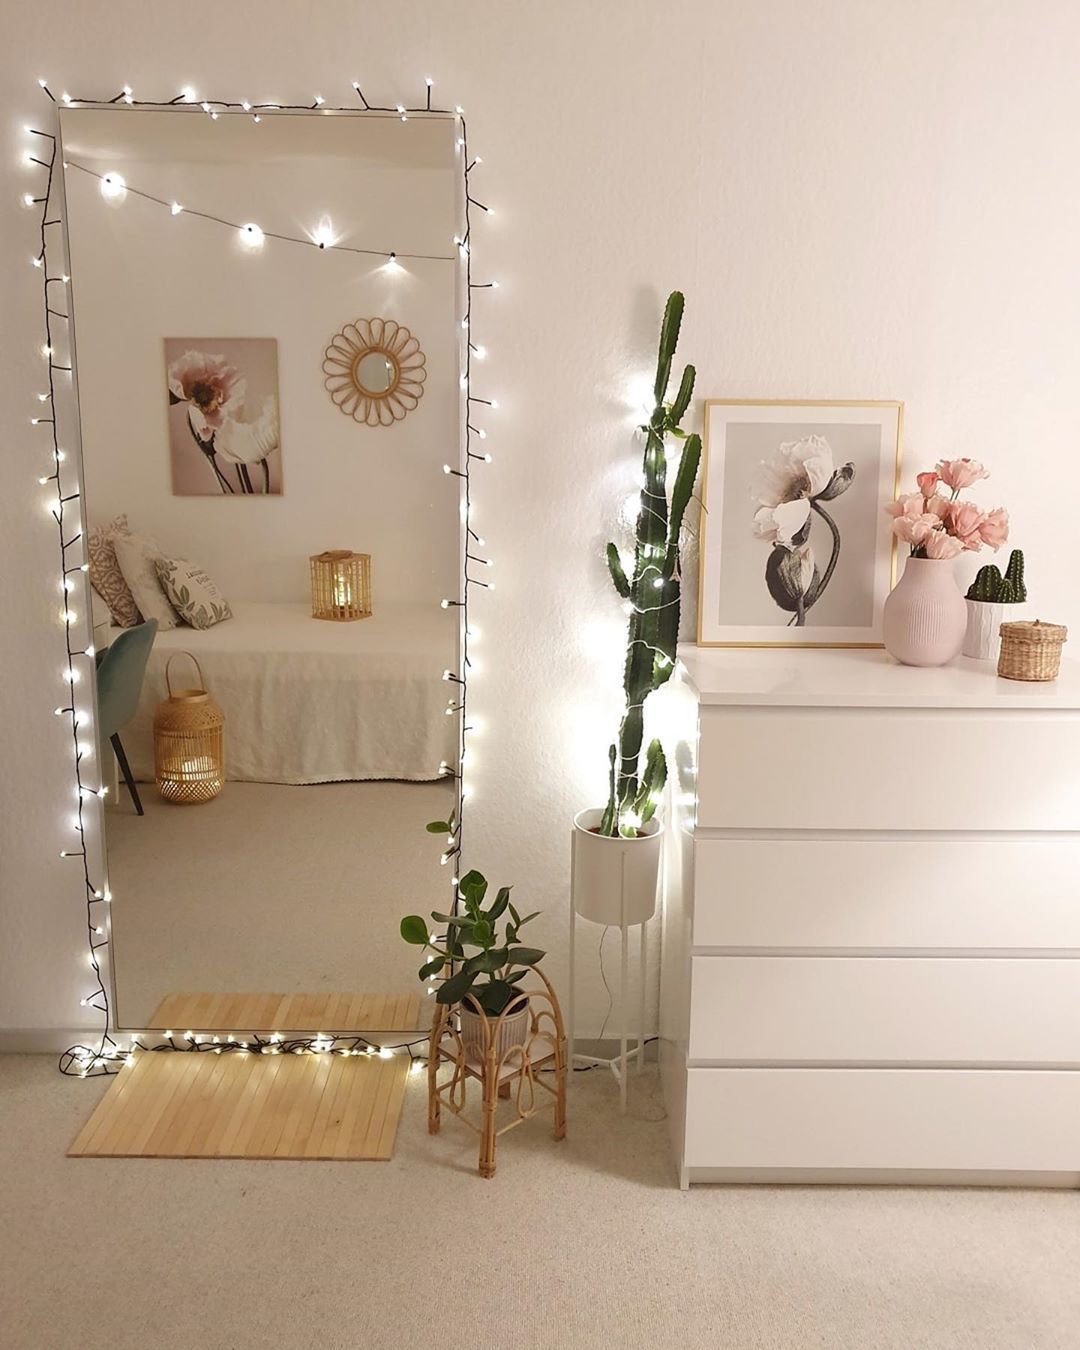 Home Decor Inspiration ? on Instagram: “via @my_homely_decor вњЁ In love with this dreamy styling by @mrscarlissa рџ?Ќвќ¤пёЏ What do you think? рџЊµ” -   15 room decor Bedroom girls ideas